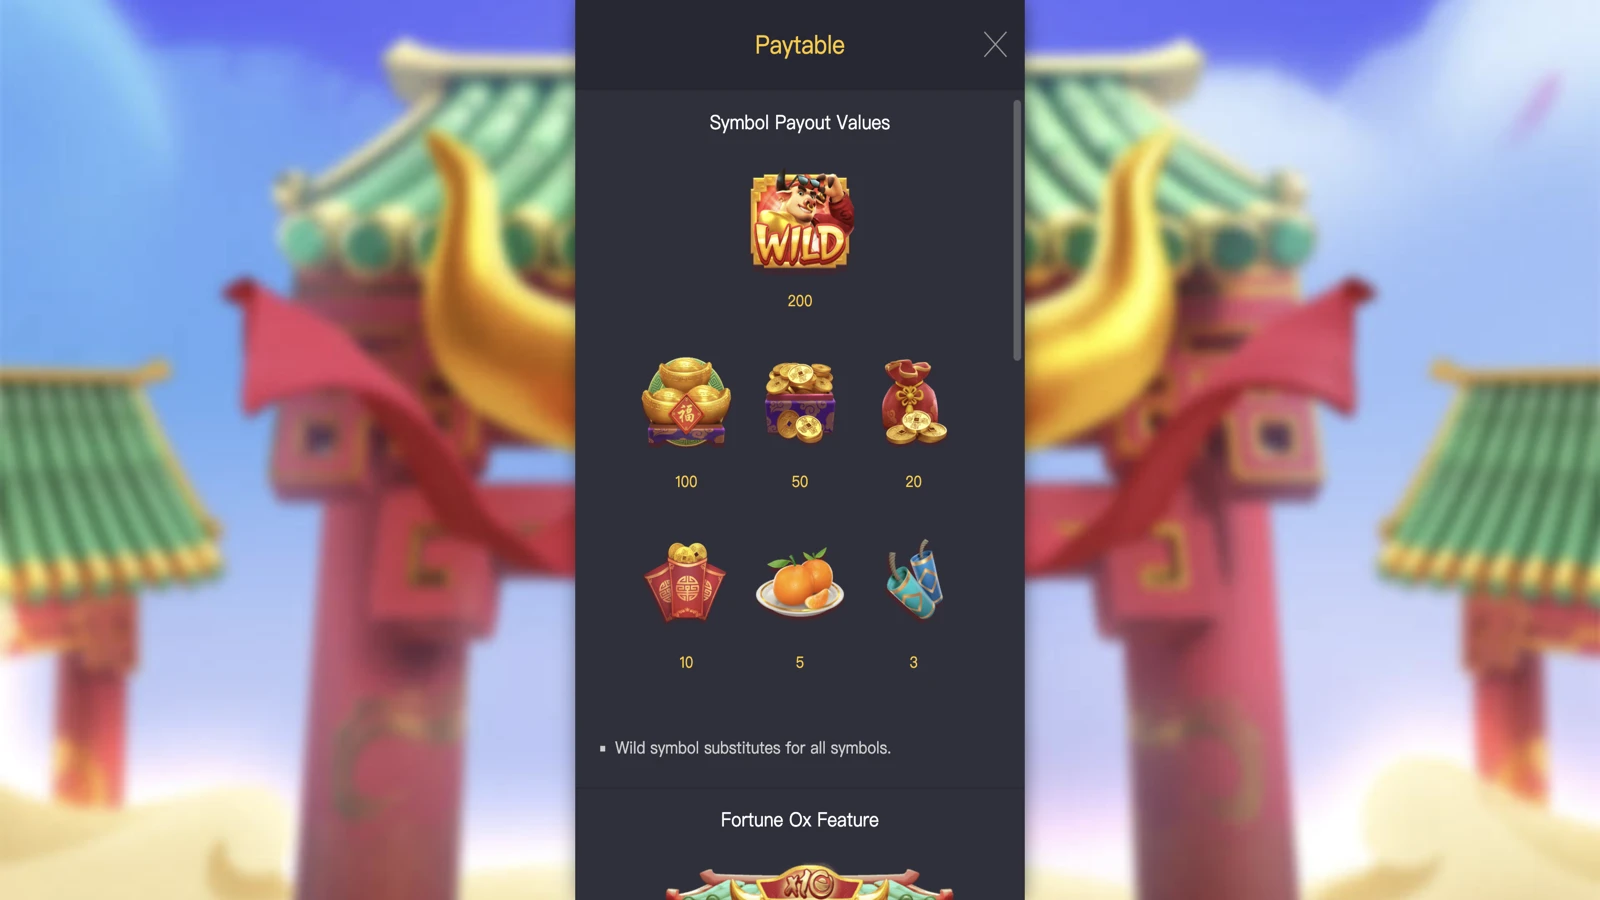 Fortune Ox paytable 1